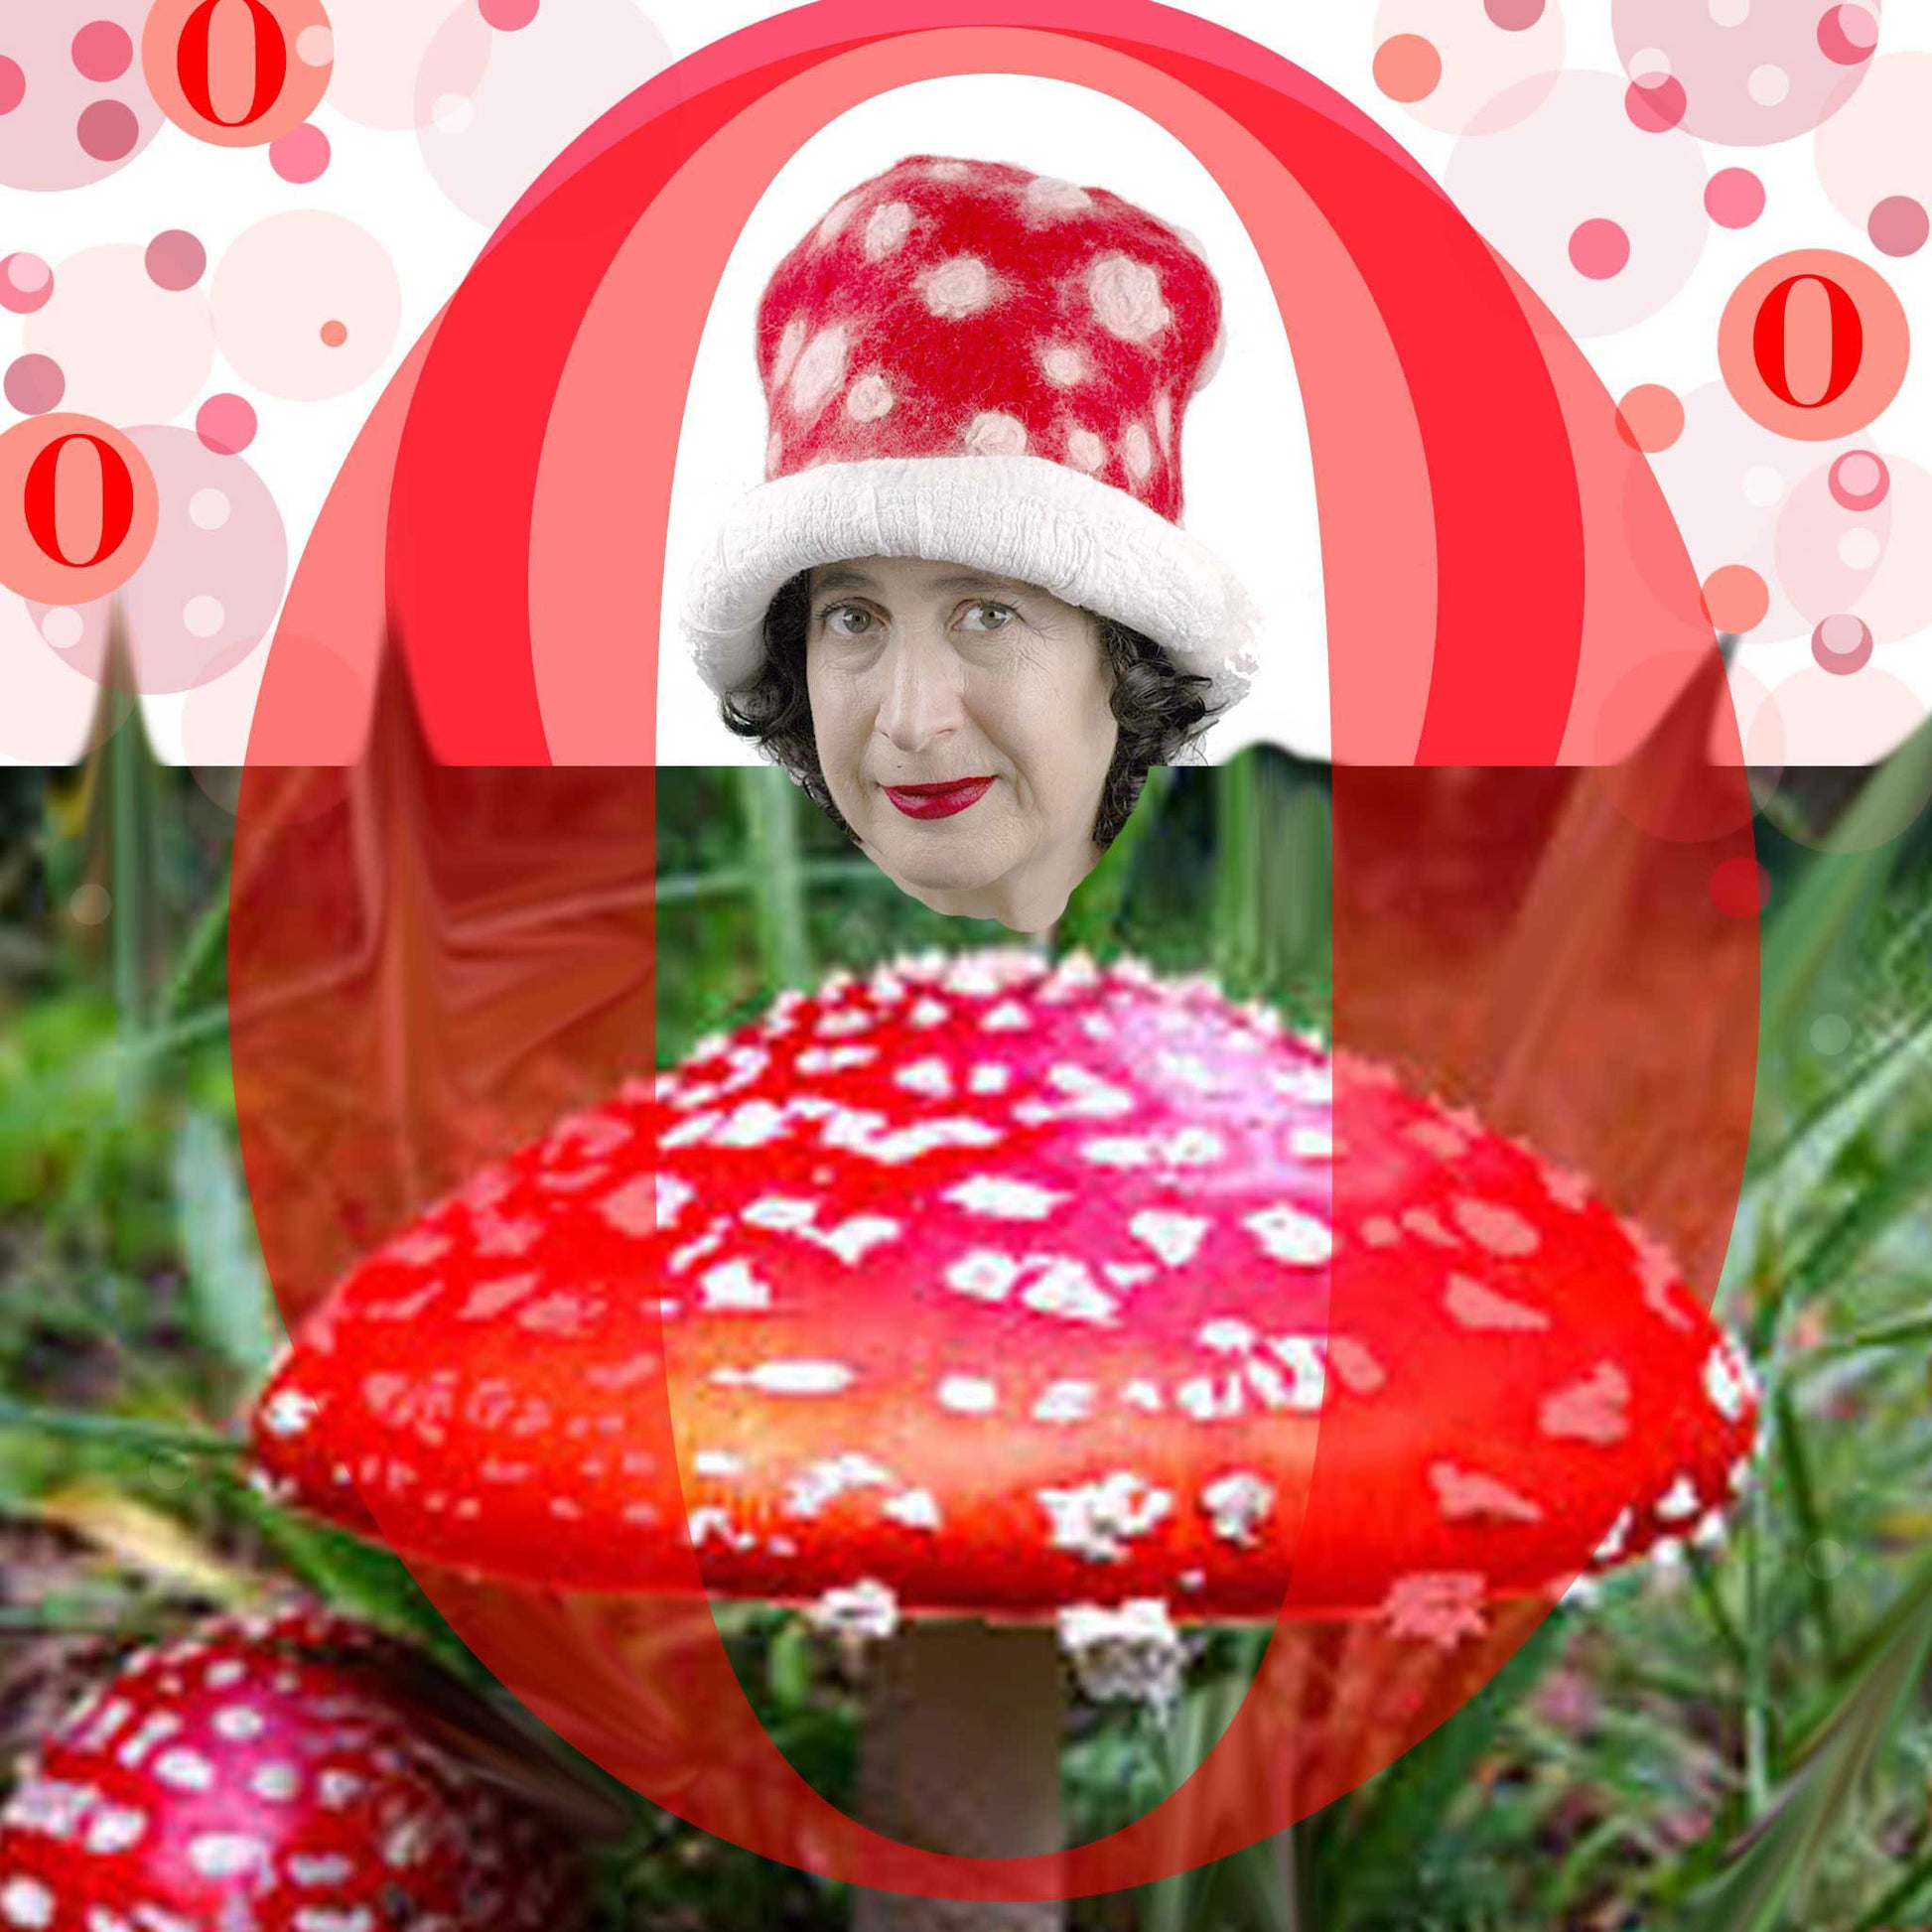 Red and White Amanita Mushroom Felted Top Hat - digital collage.